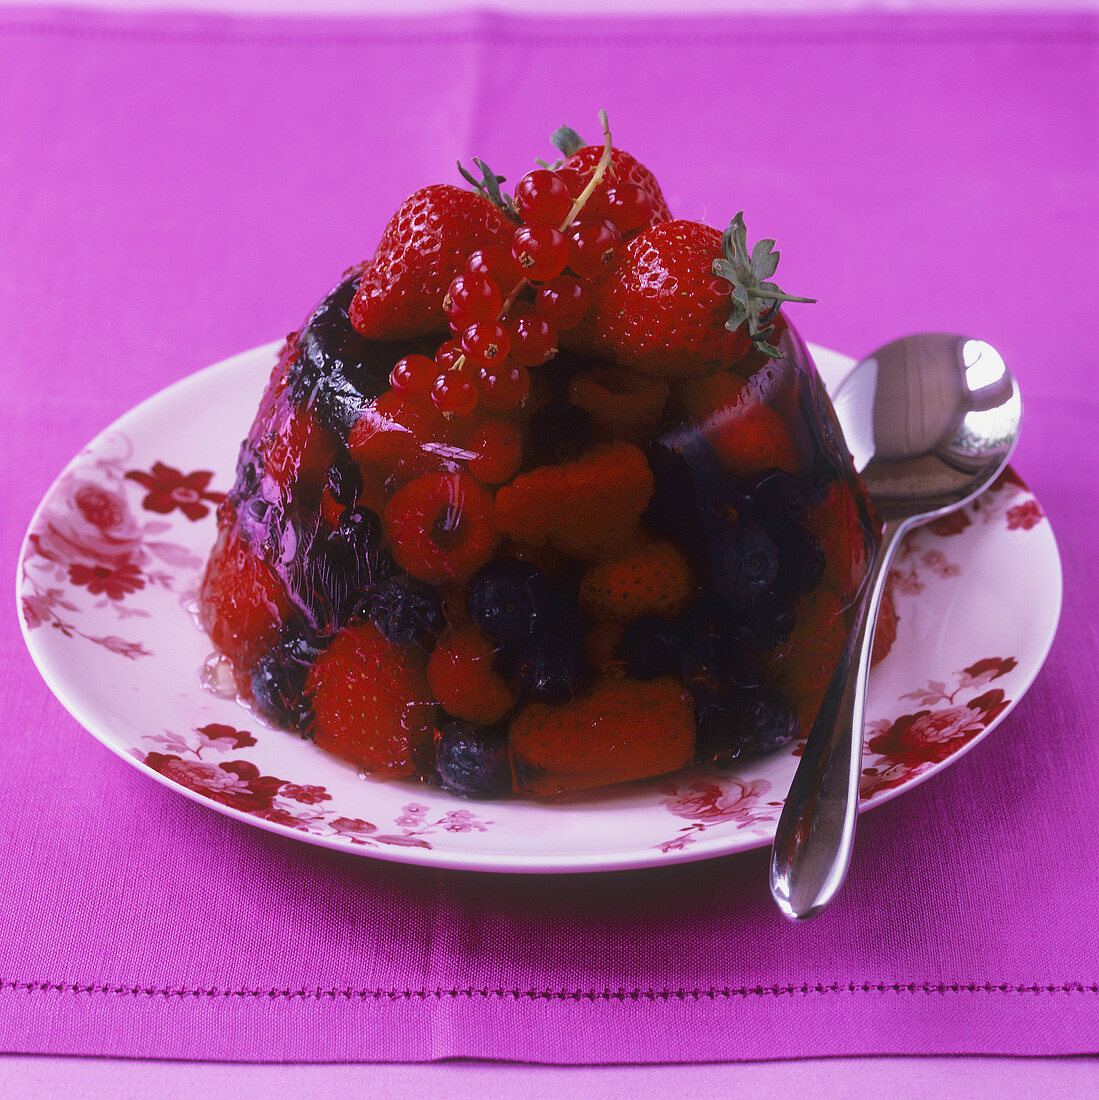 Berries in jelly